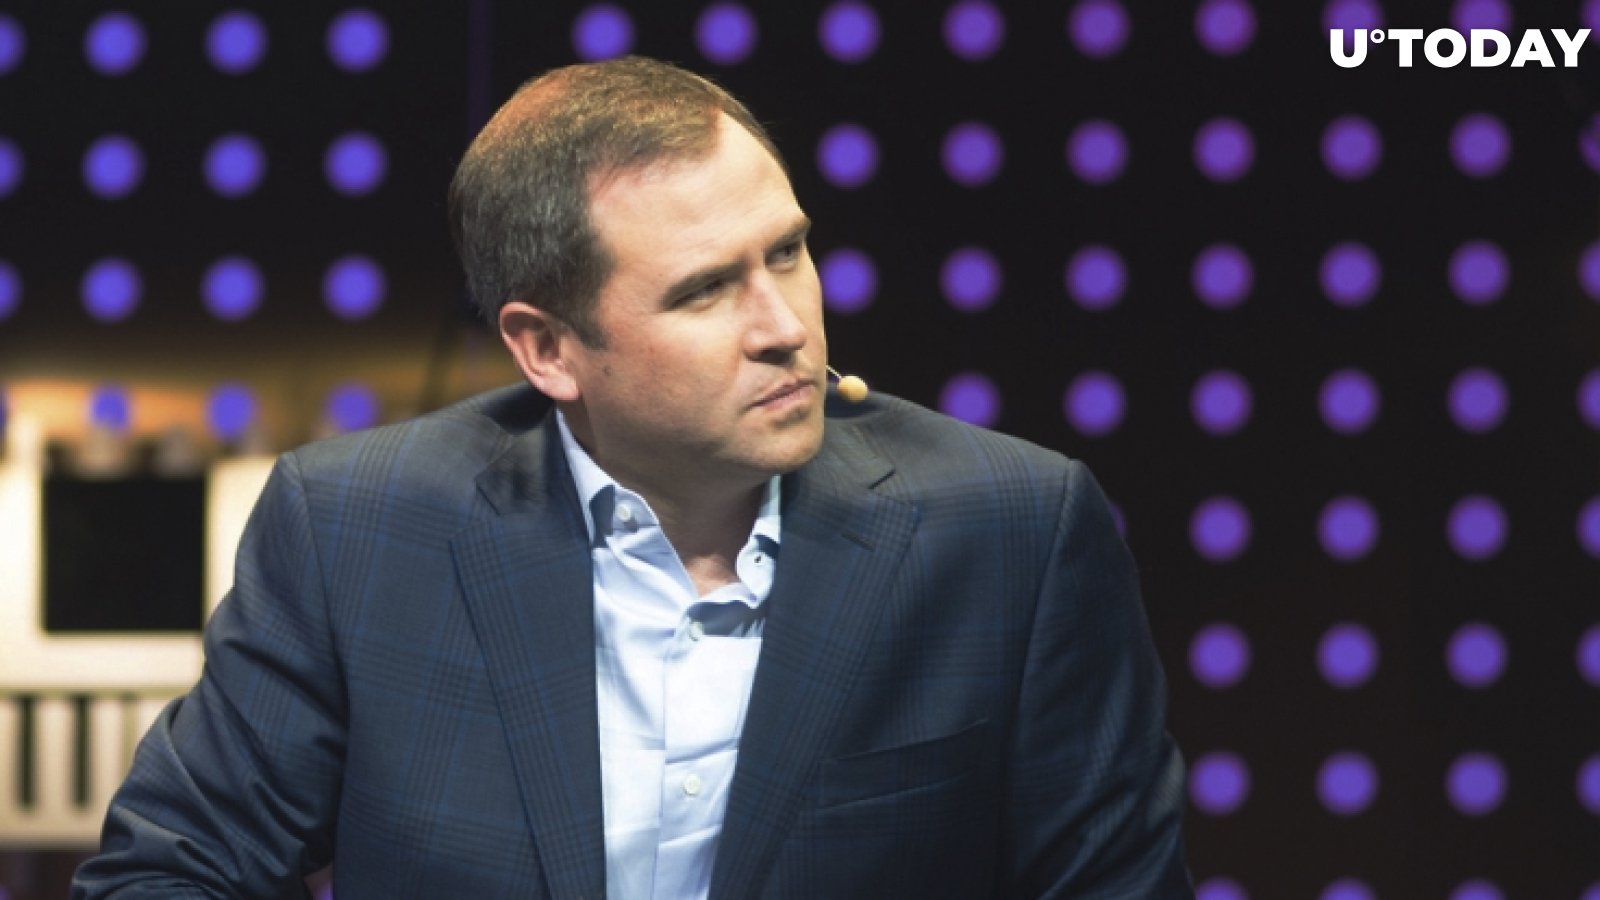 Ripple CEO Brad Garlinghouse: "I Want Bitcoin to Be Successful"